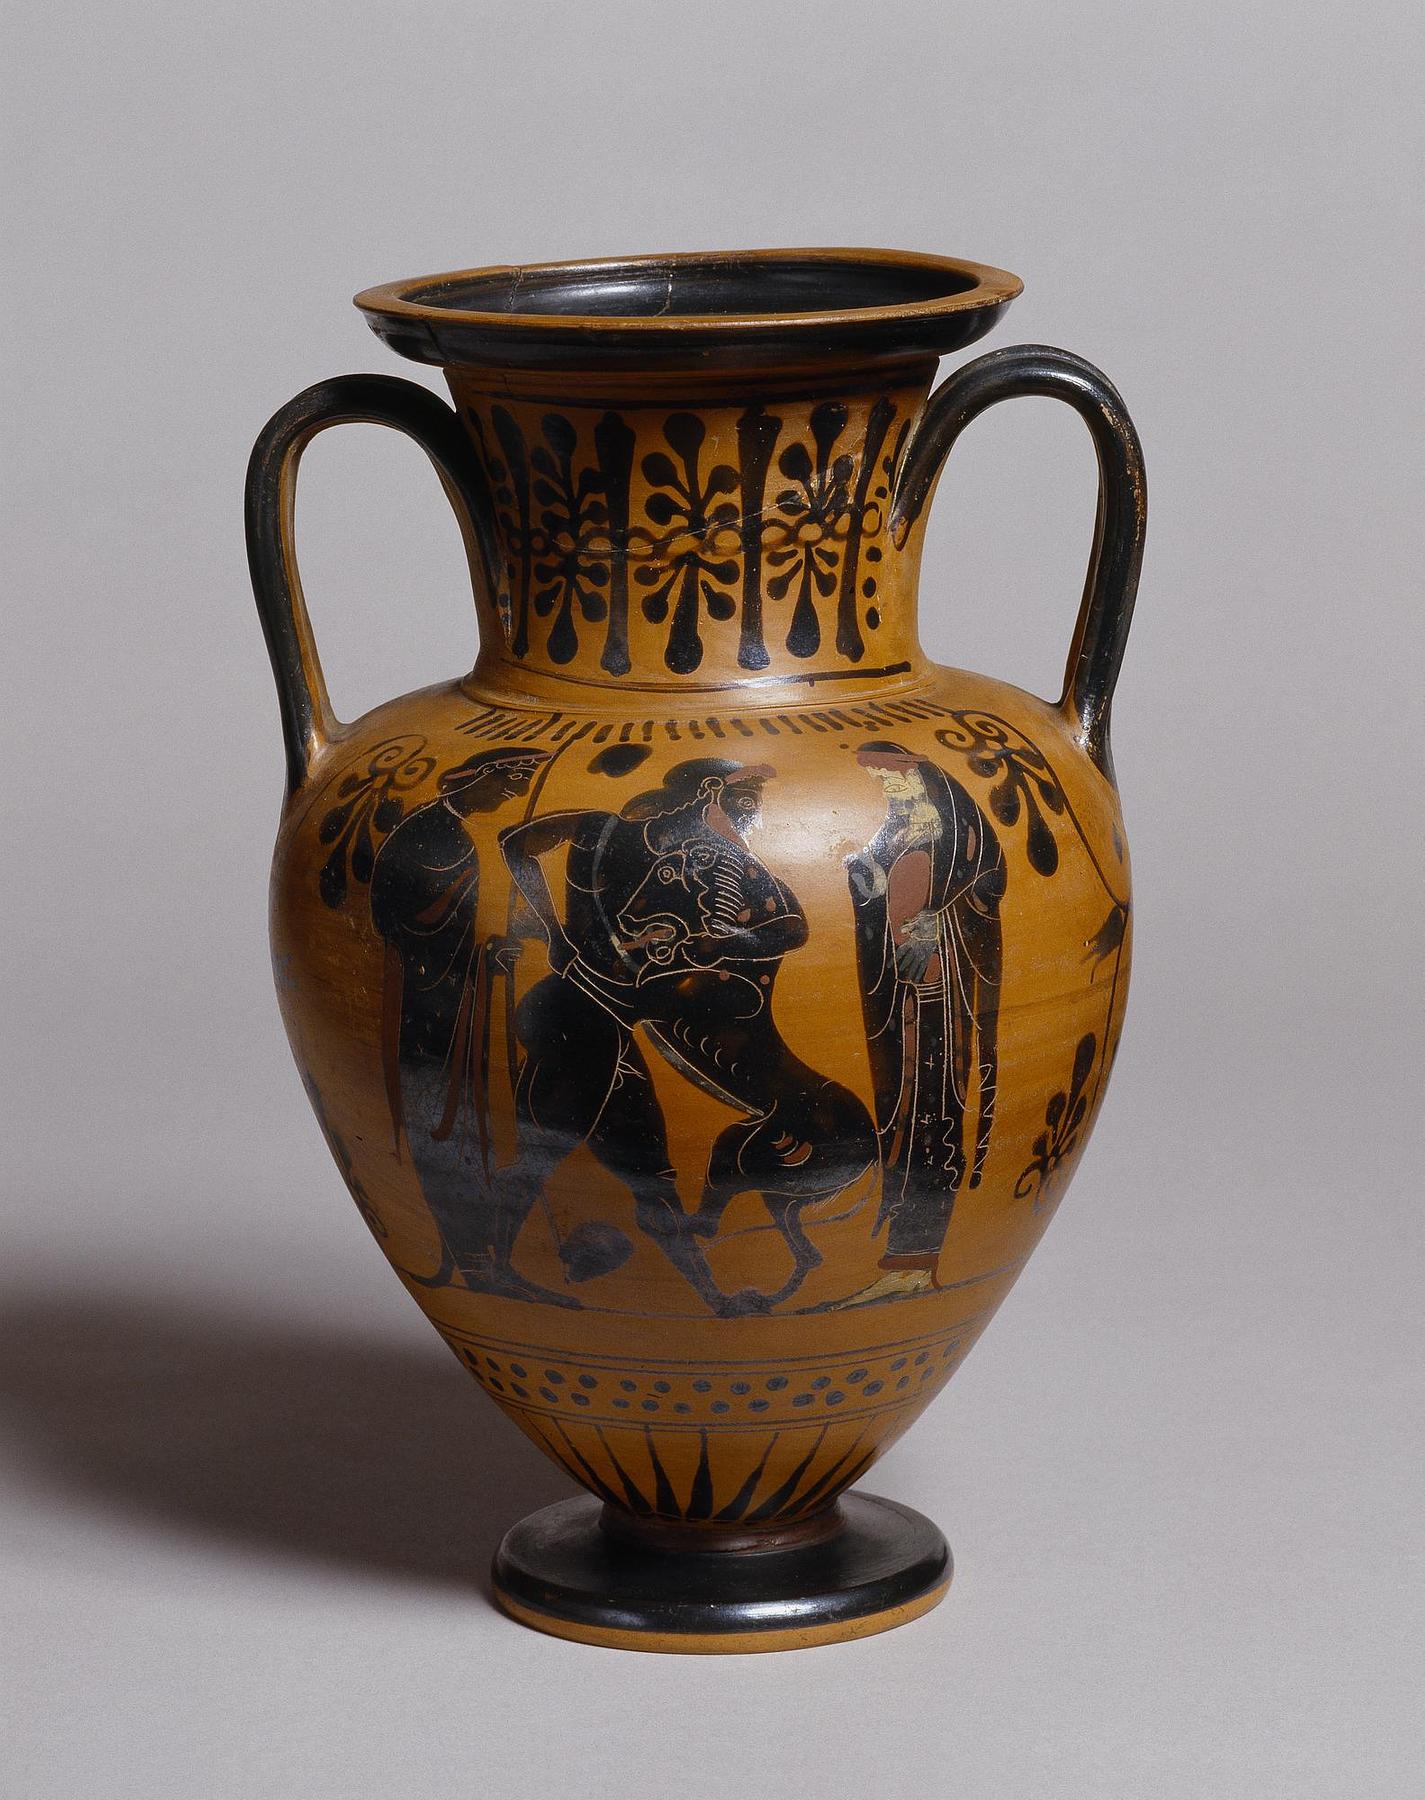 Amphora with Heracles and the Nemean lion (A) and a running Amazon (B), H540